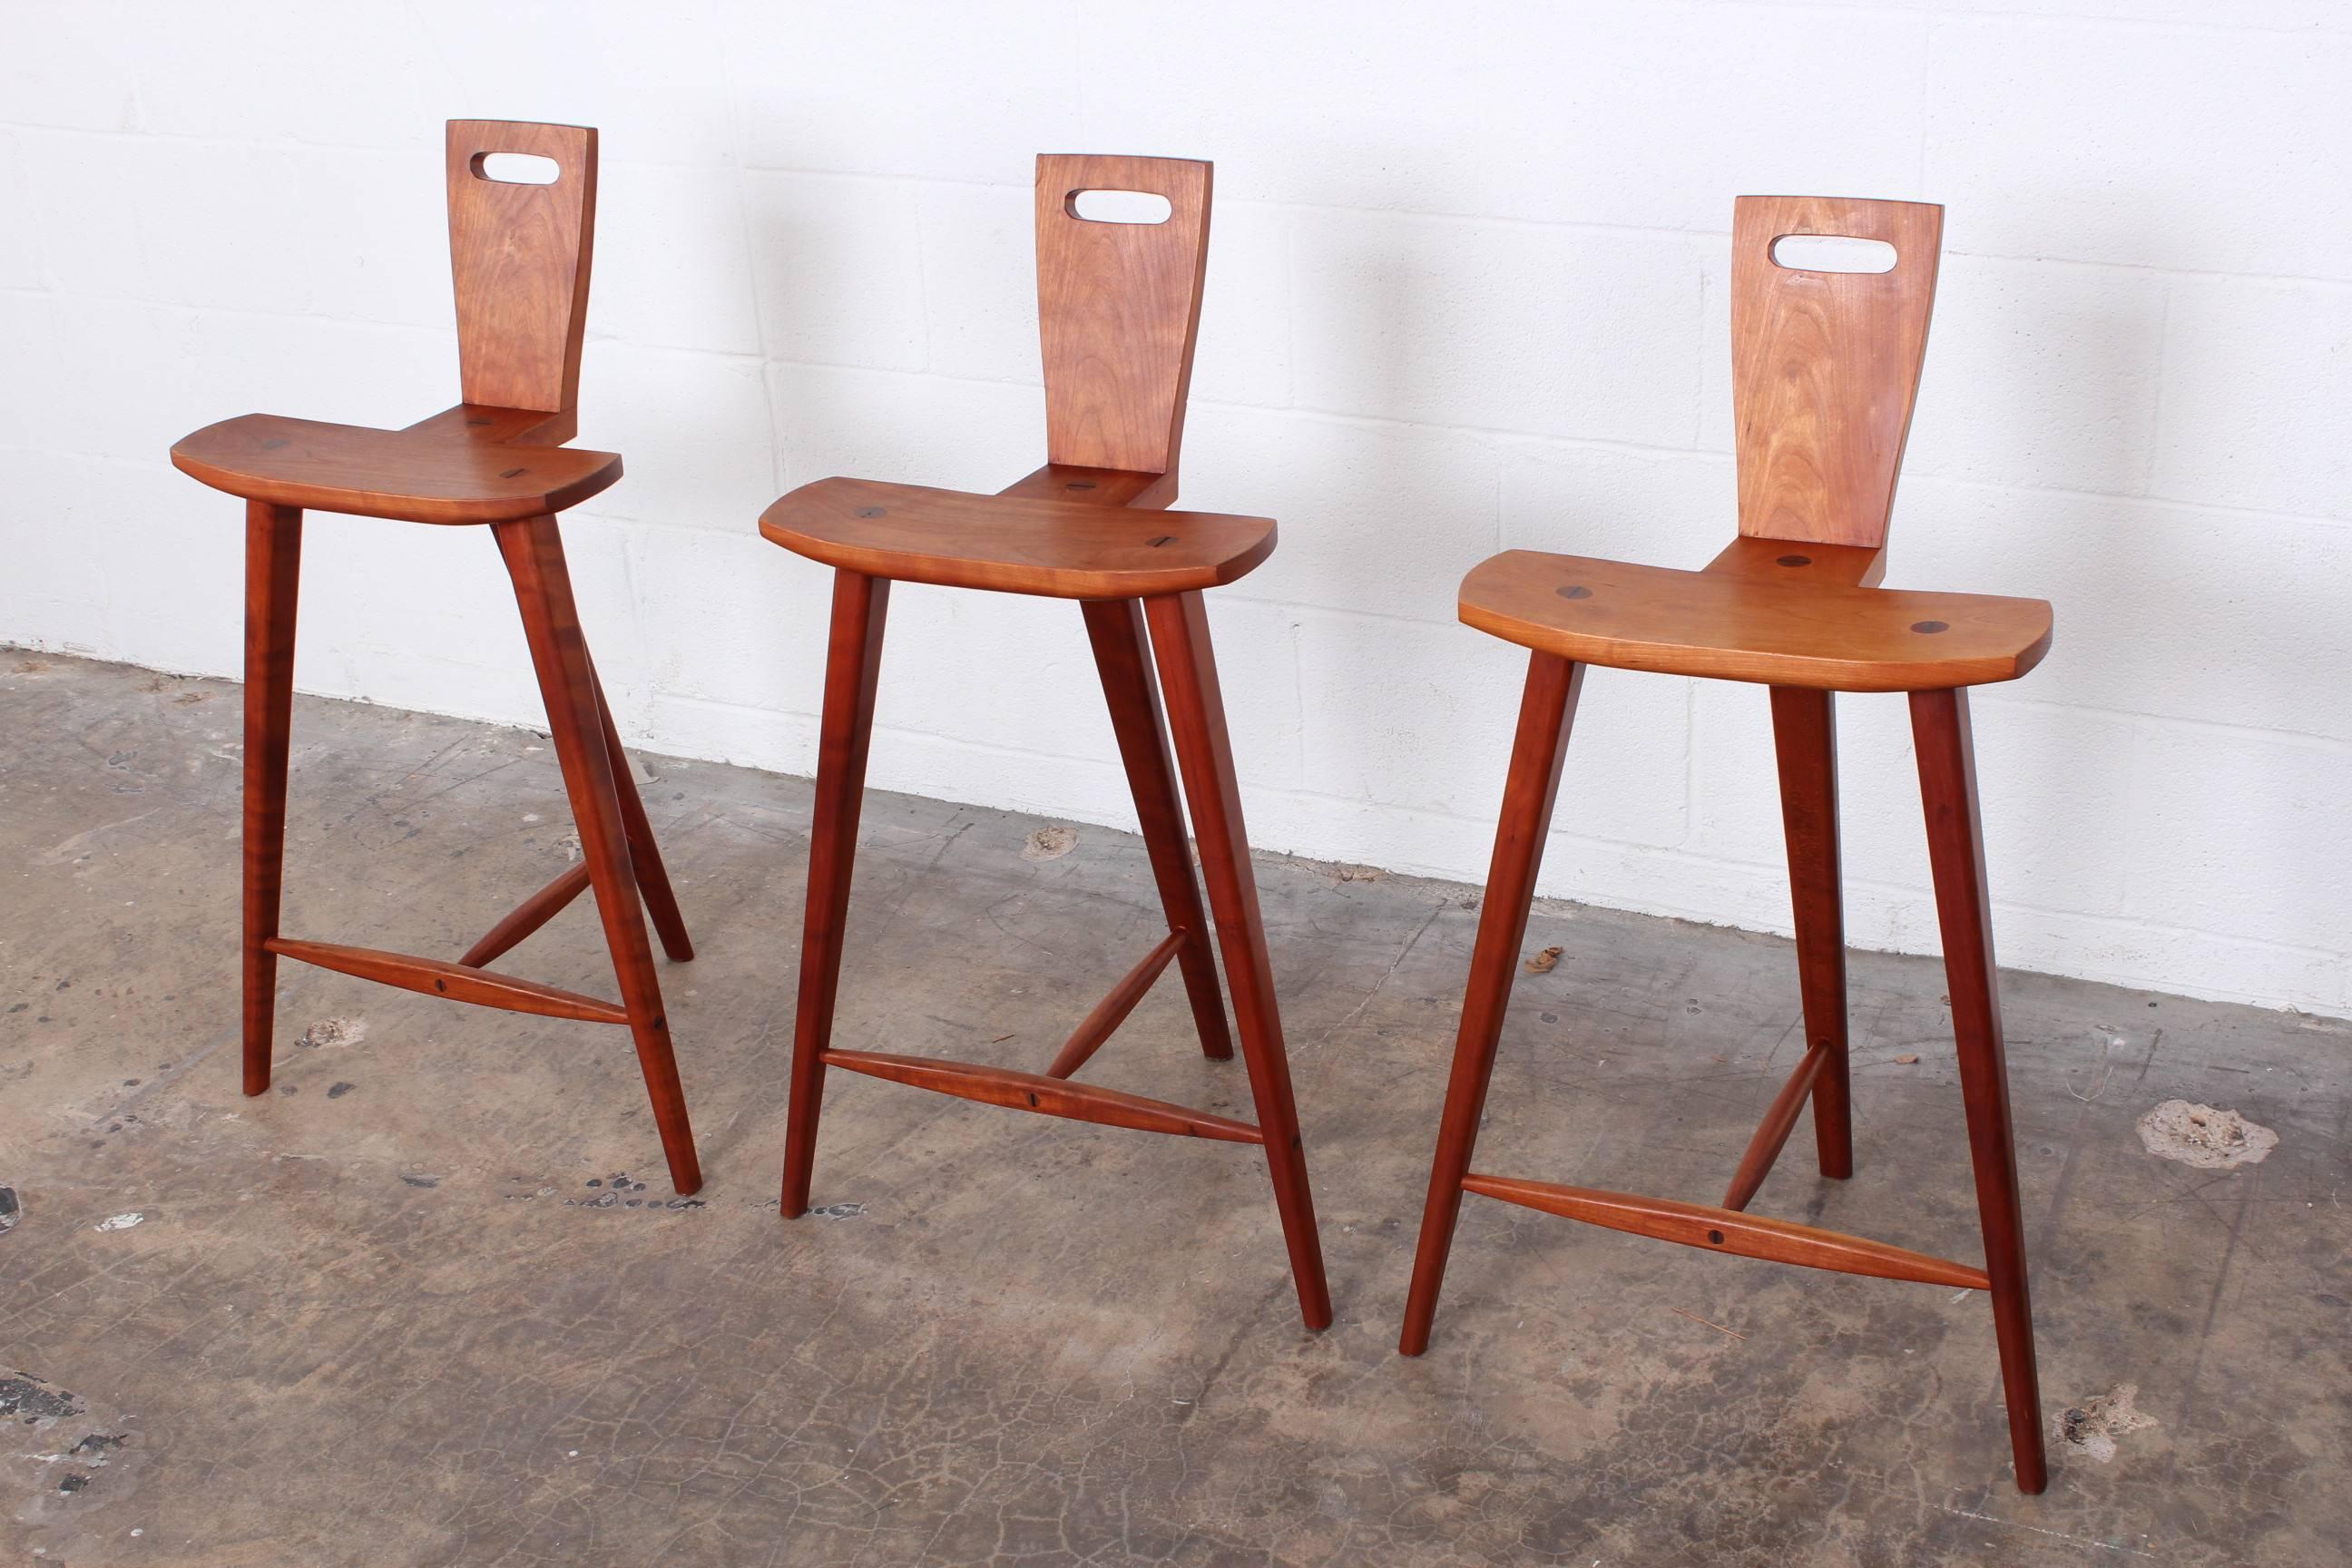 Three Barstools in the style of Tage Frid 1